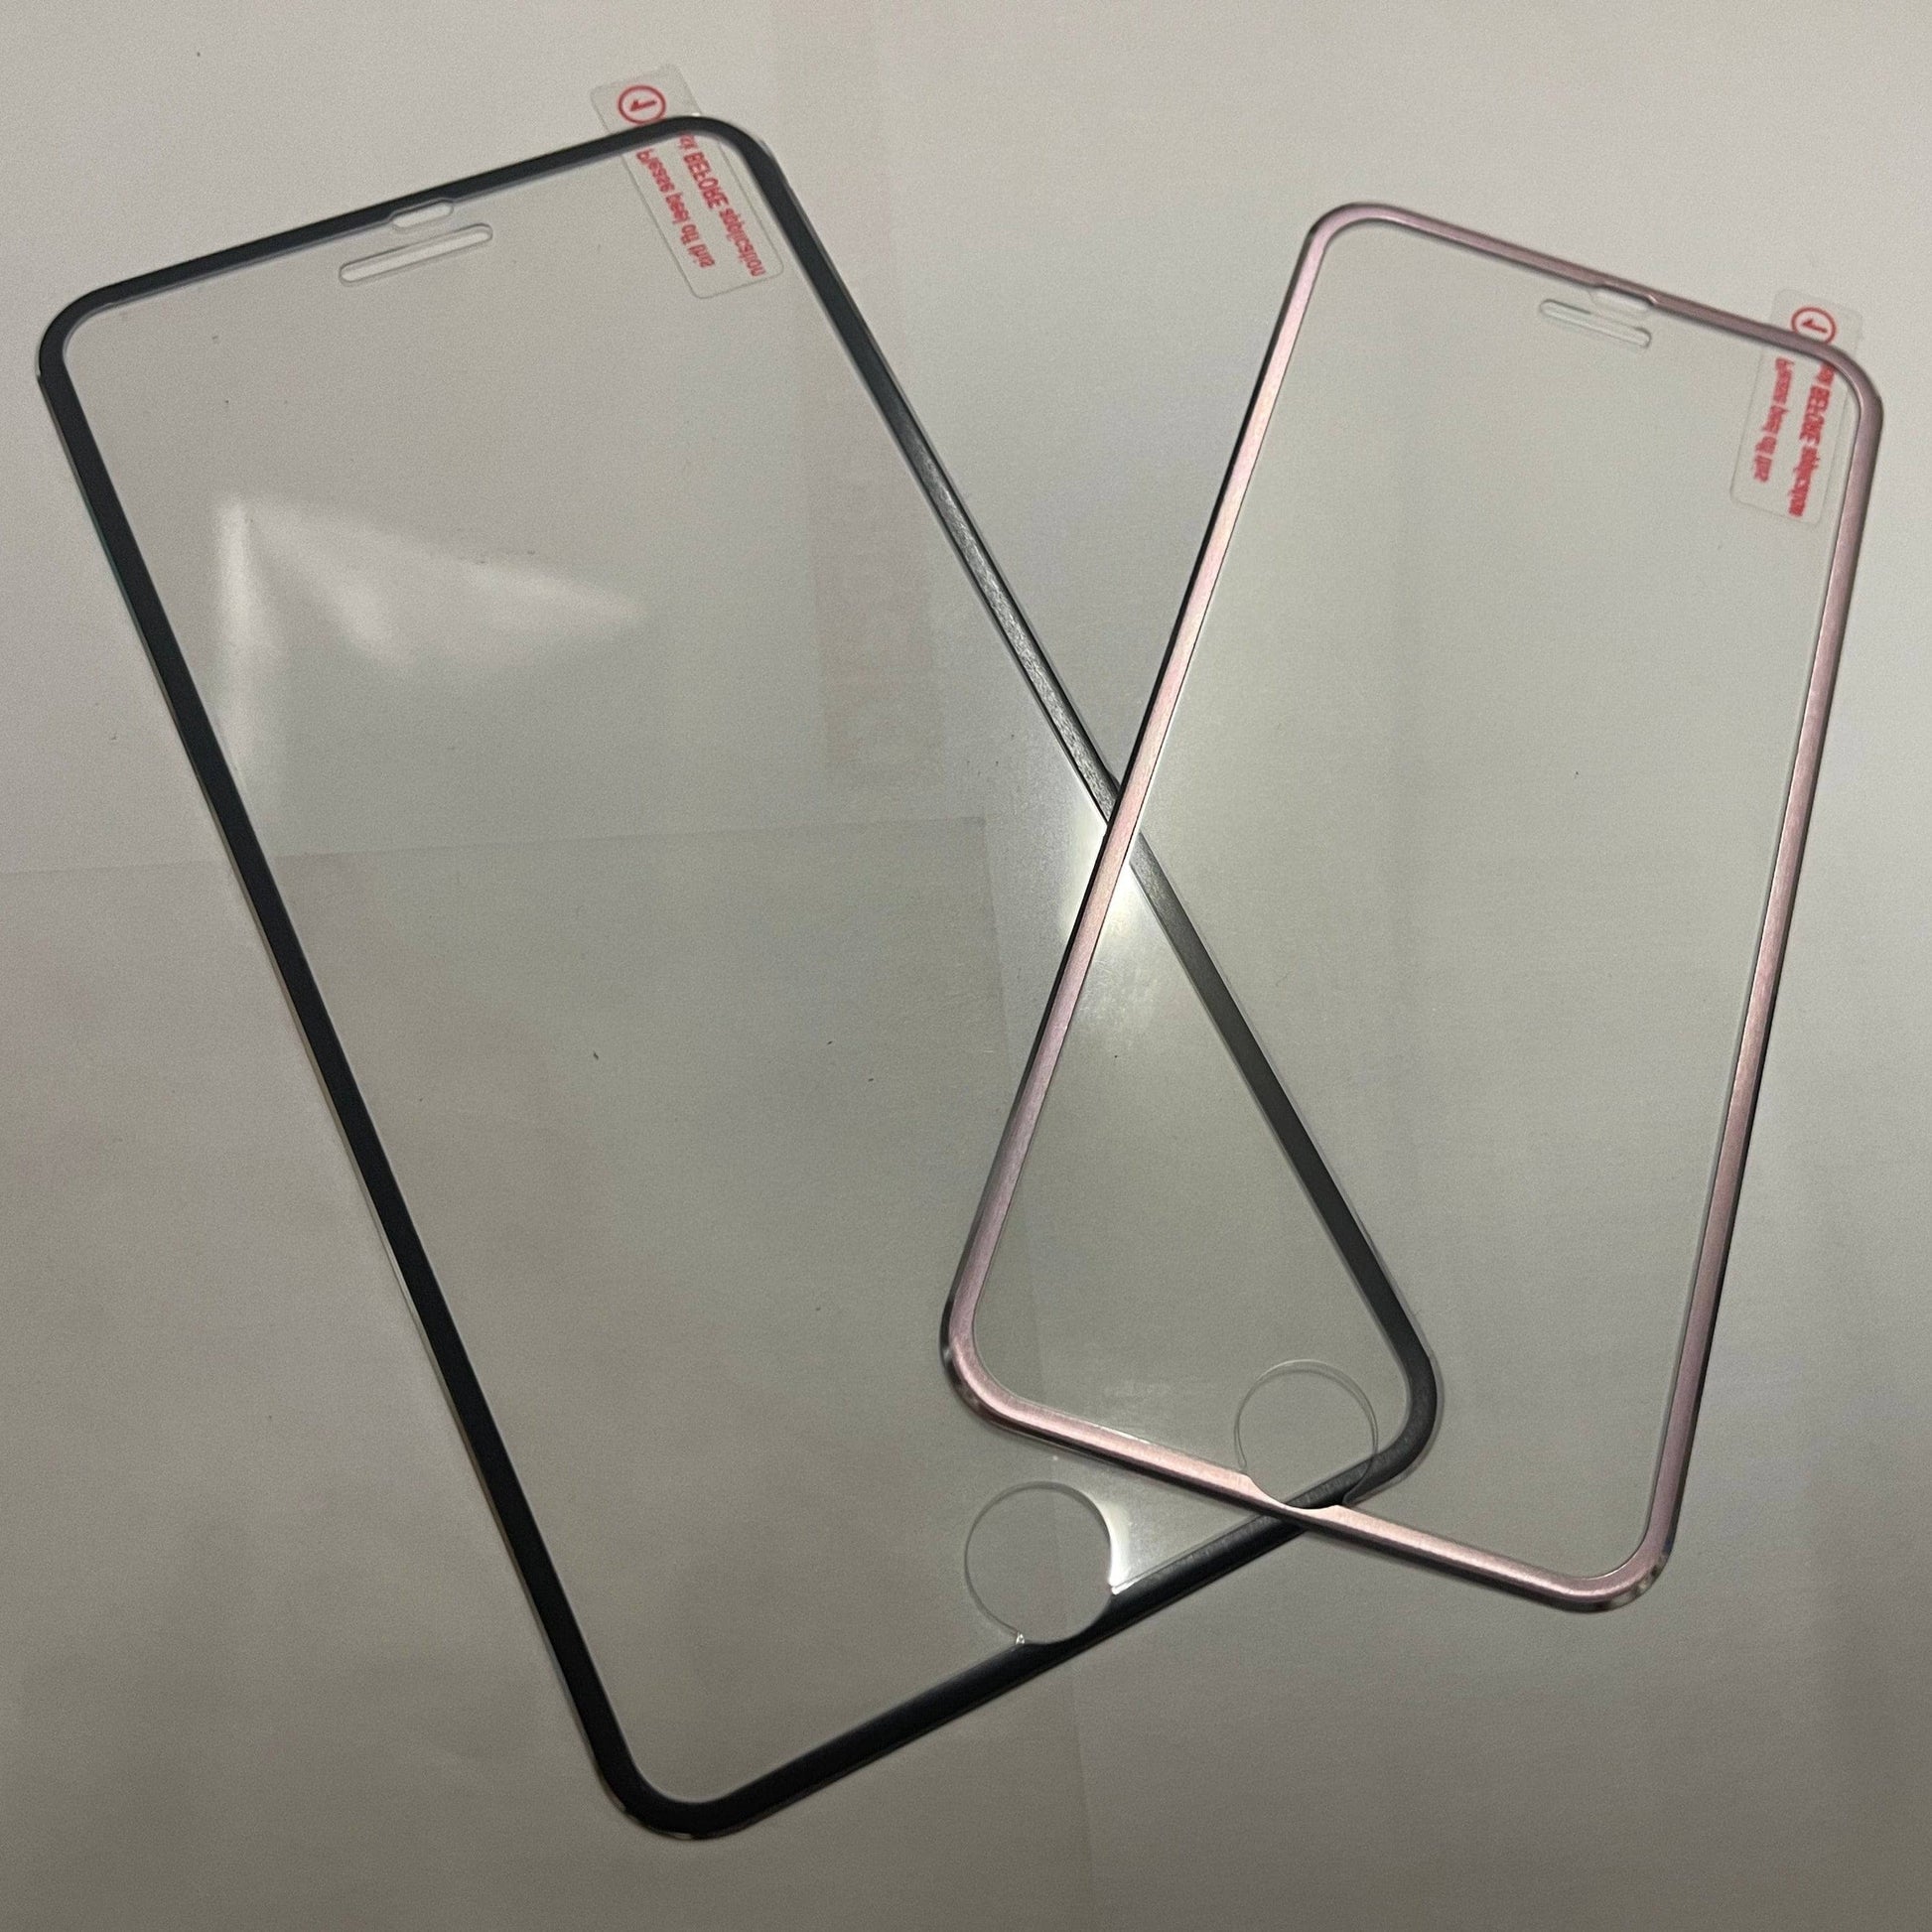 Metal Edge Tempered Glass Screen Protector for iPhone 8 Plus 8/7+ Anti Shatter-Screen Protector-Generic-www.PhoneGuy.com.au